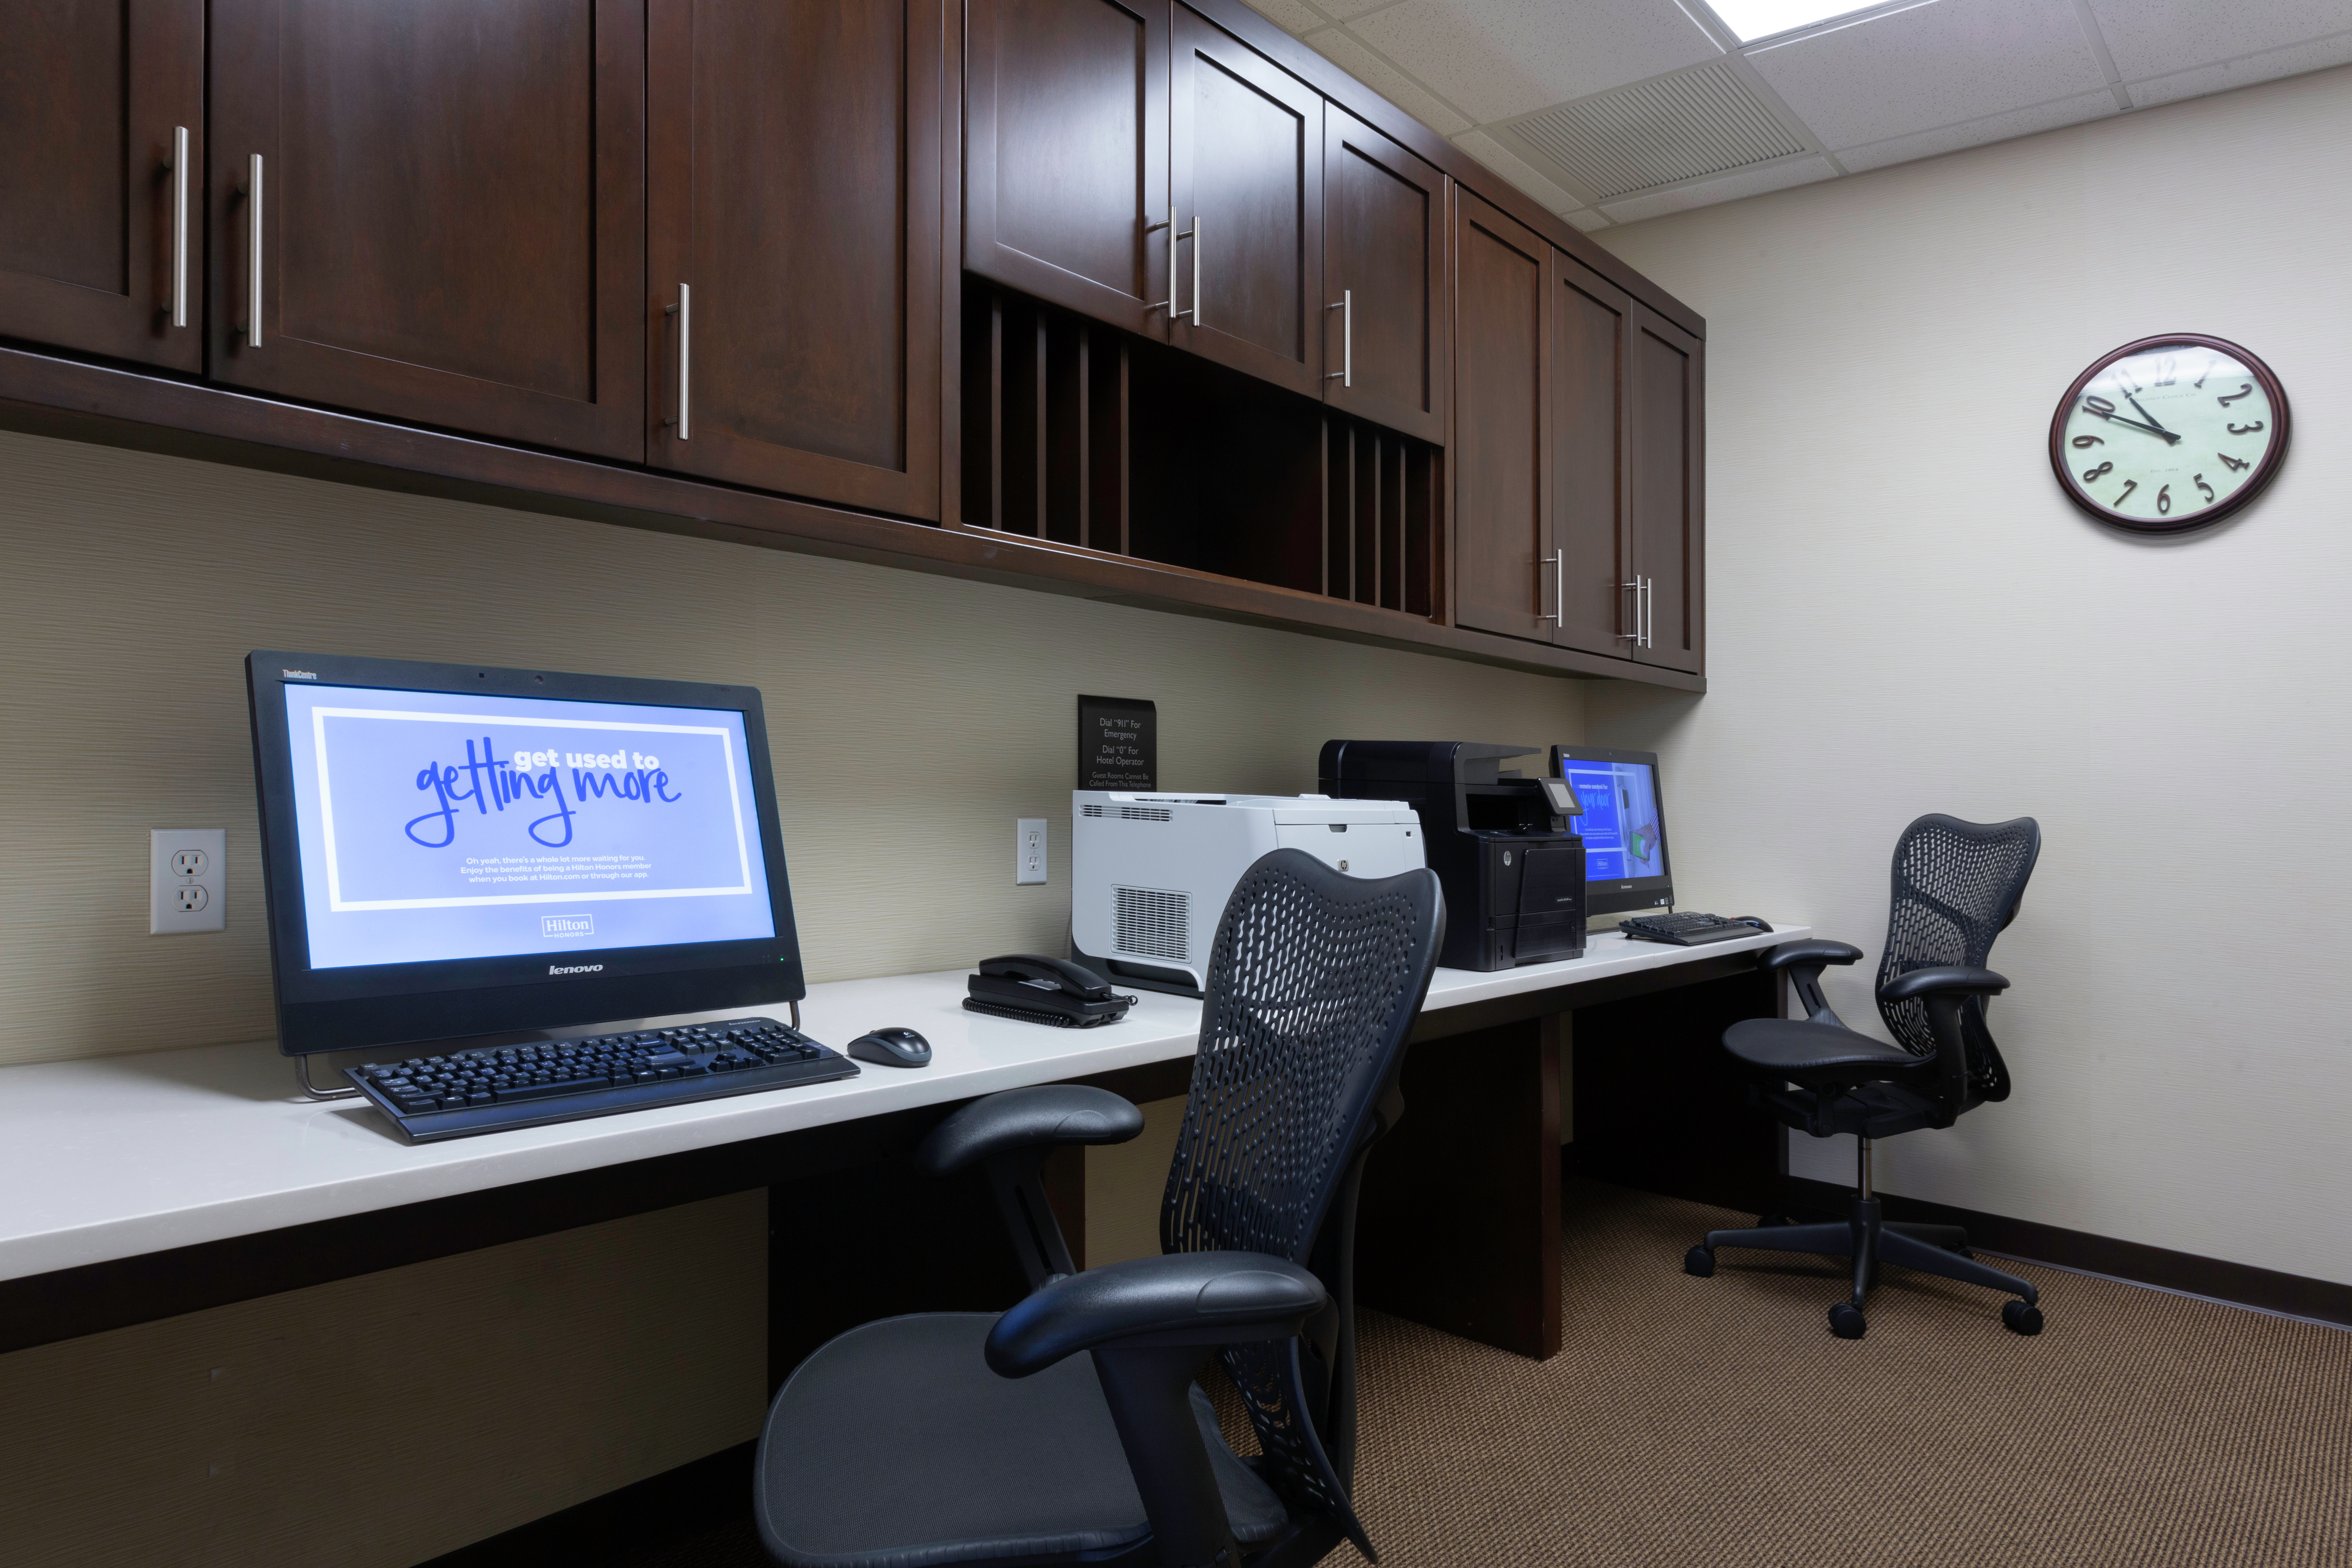 Business Center Computers and Printer for Guest Use